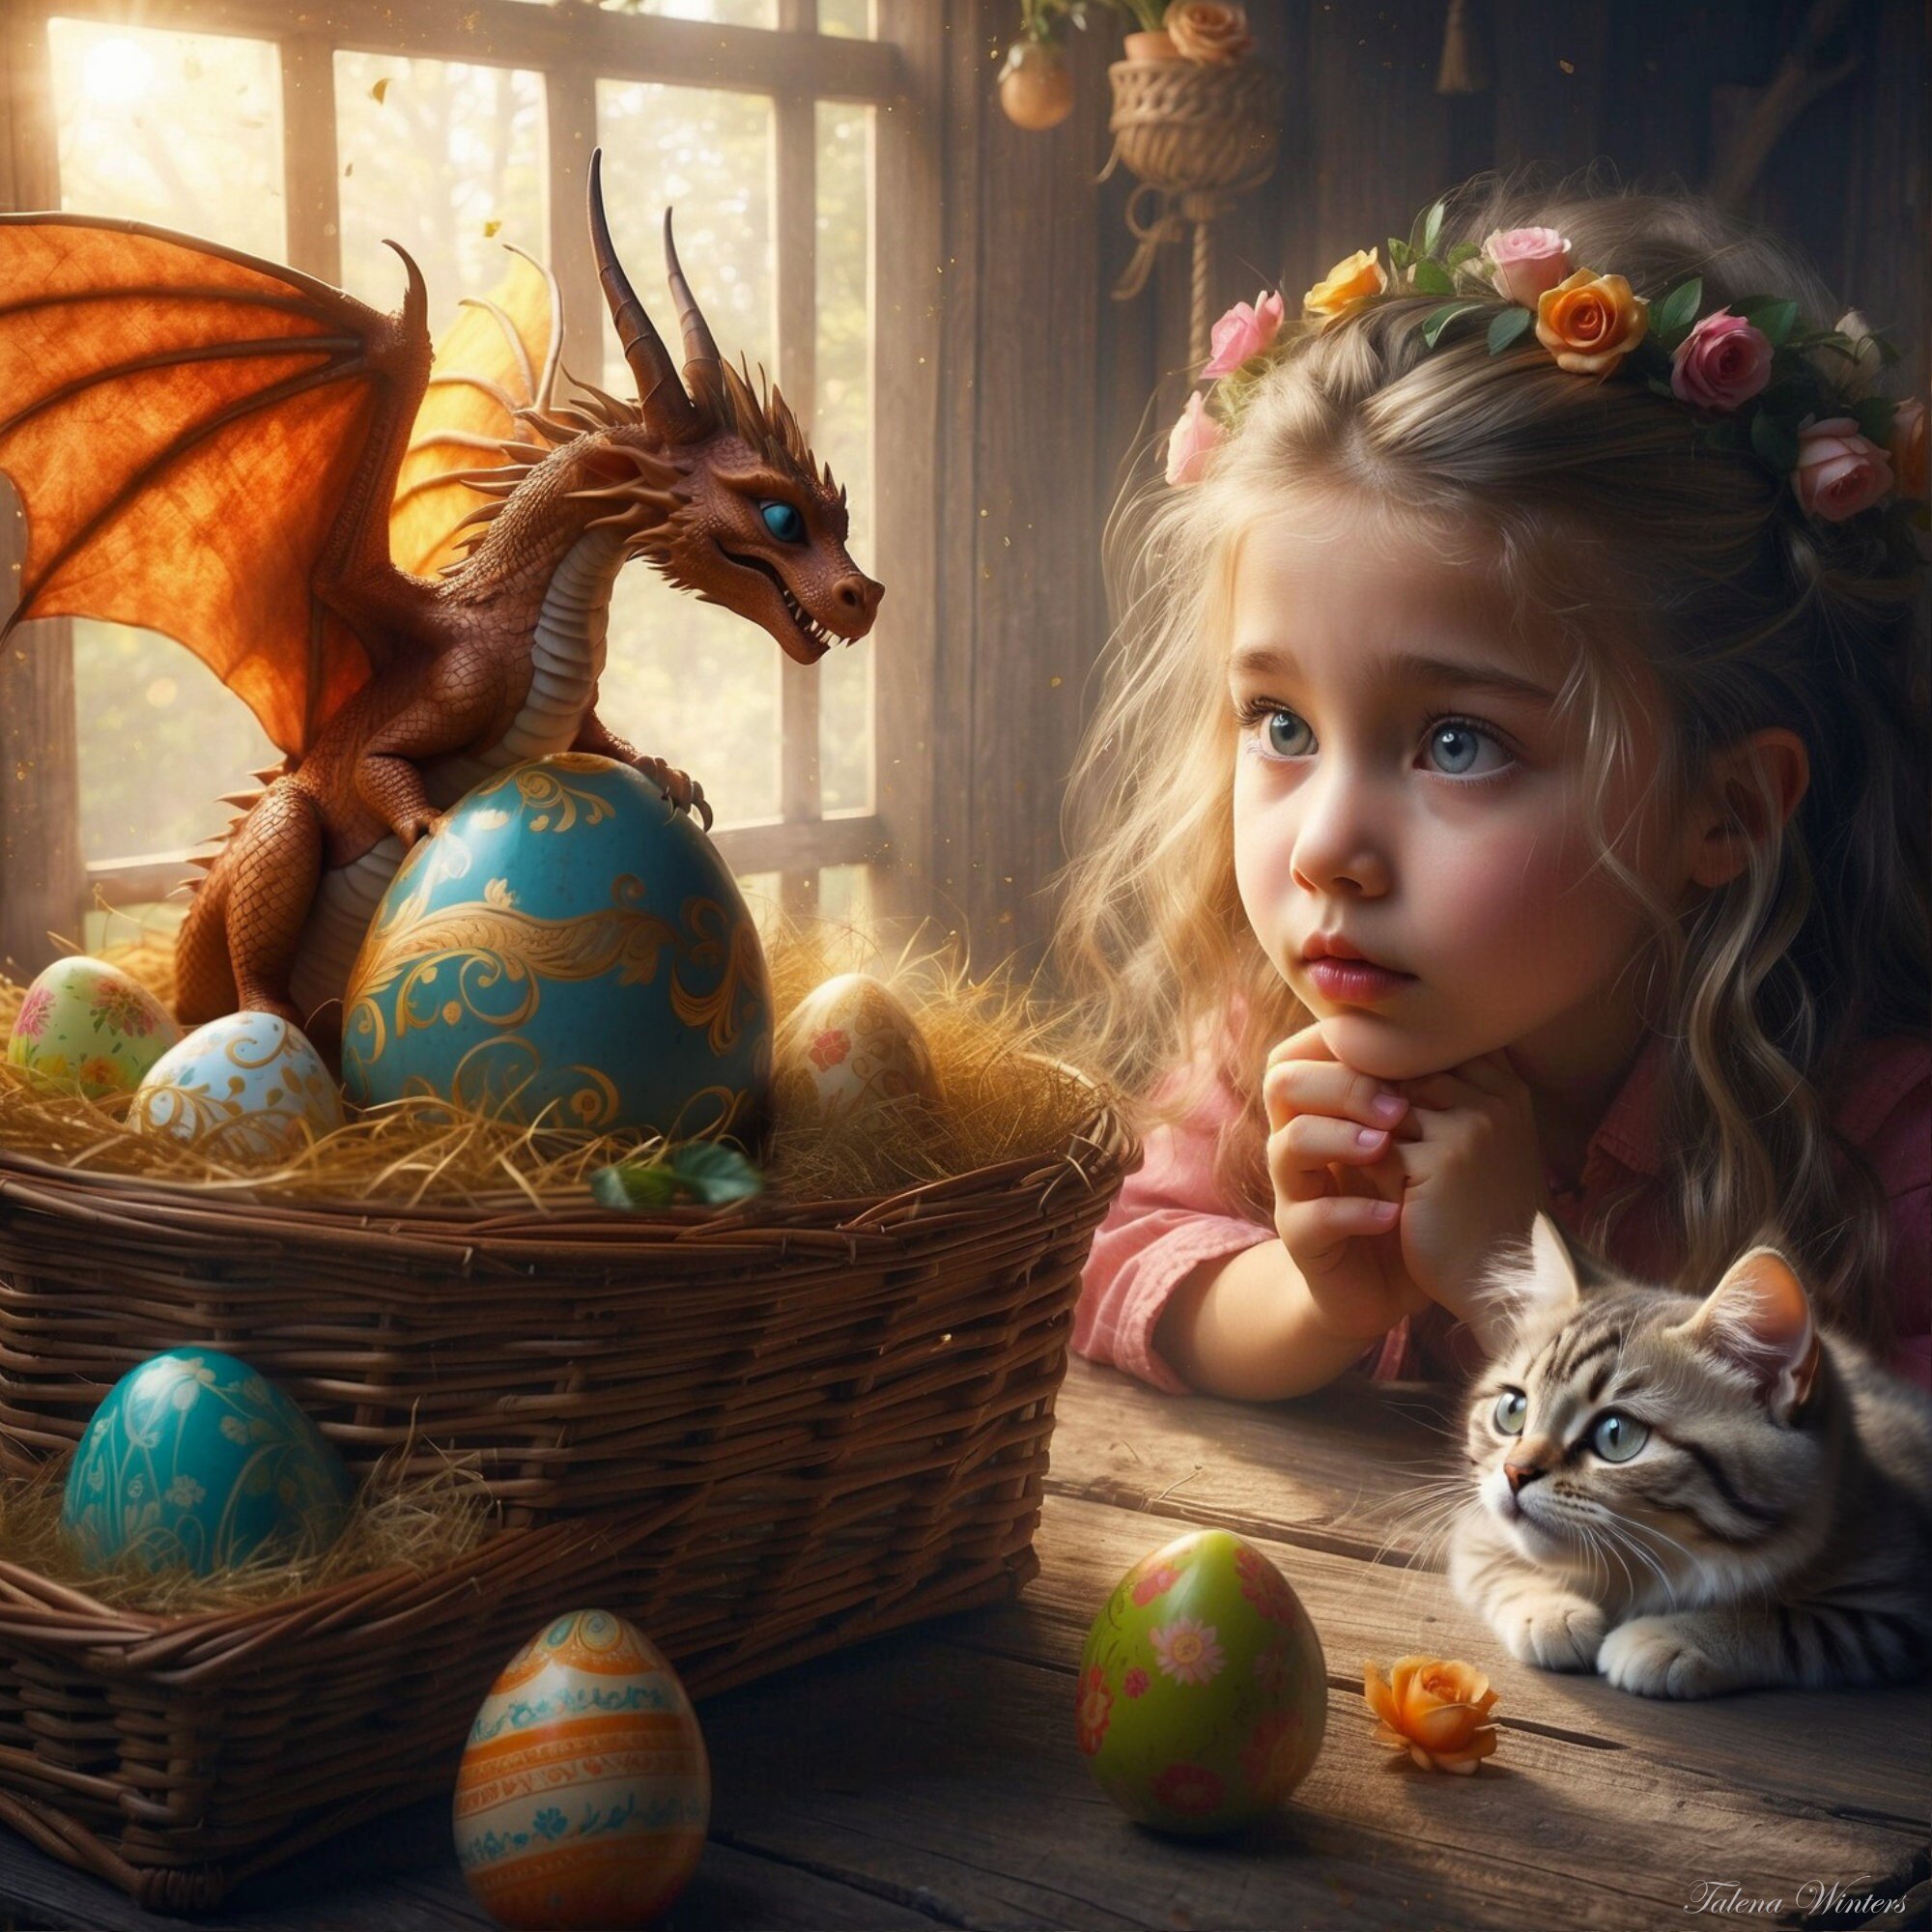 May your Easter weekend be full of blessing and filled with wonder, my friend.

#easter2024 #eastereggs #eastersurprise #fantasyart #childhoodwonder #babydragon #digitalart #digitalartwork #dragonsandcats